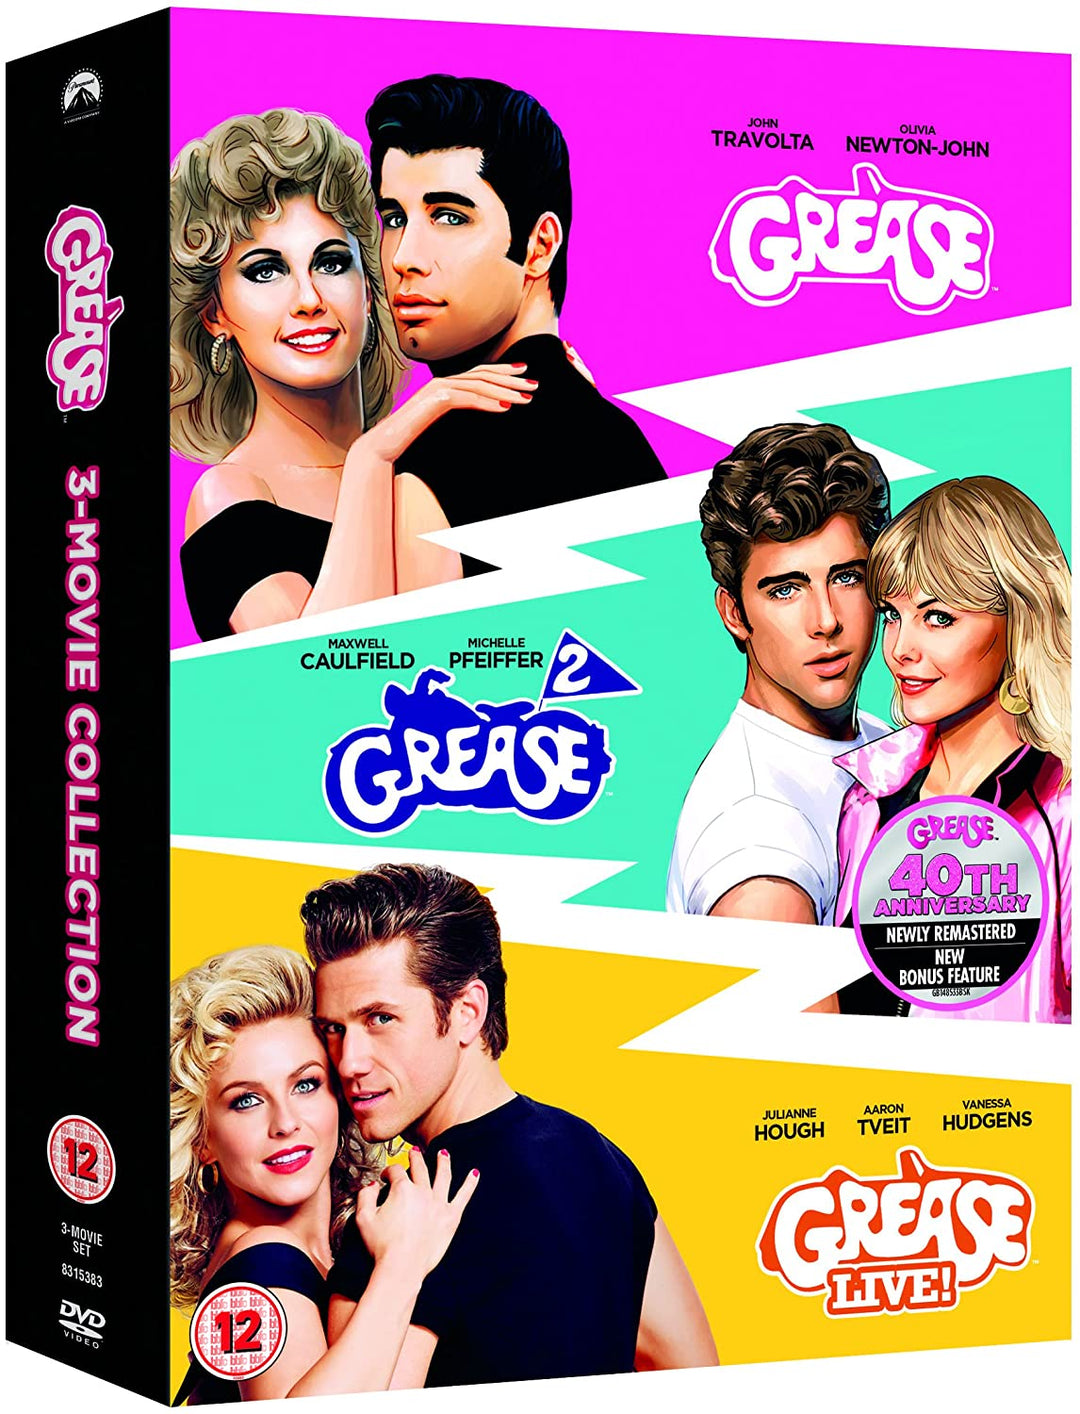 Grease 40th Anniversary Triple (Grease/Grease 2/Grease Live) [2018] - Comedy [DVD]